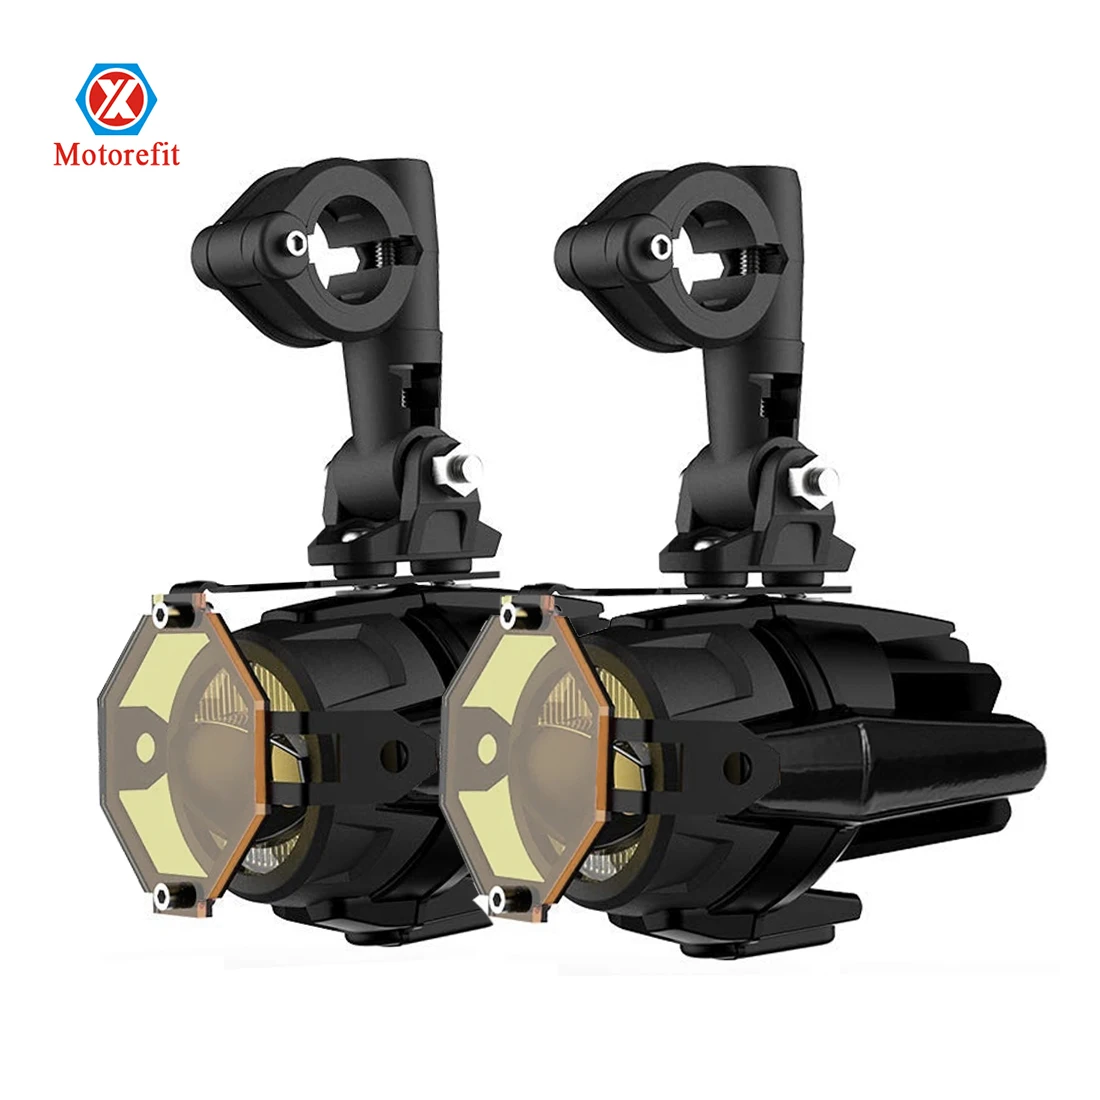 Fog Lights for BMW R1200GS LC R 1250GS R1250GS F800GS GSR1200 F850GS F750GS Adv R 1200 GS Motorcycle Light Guards C